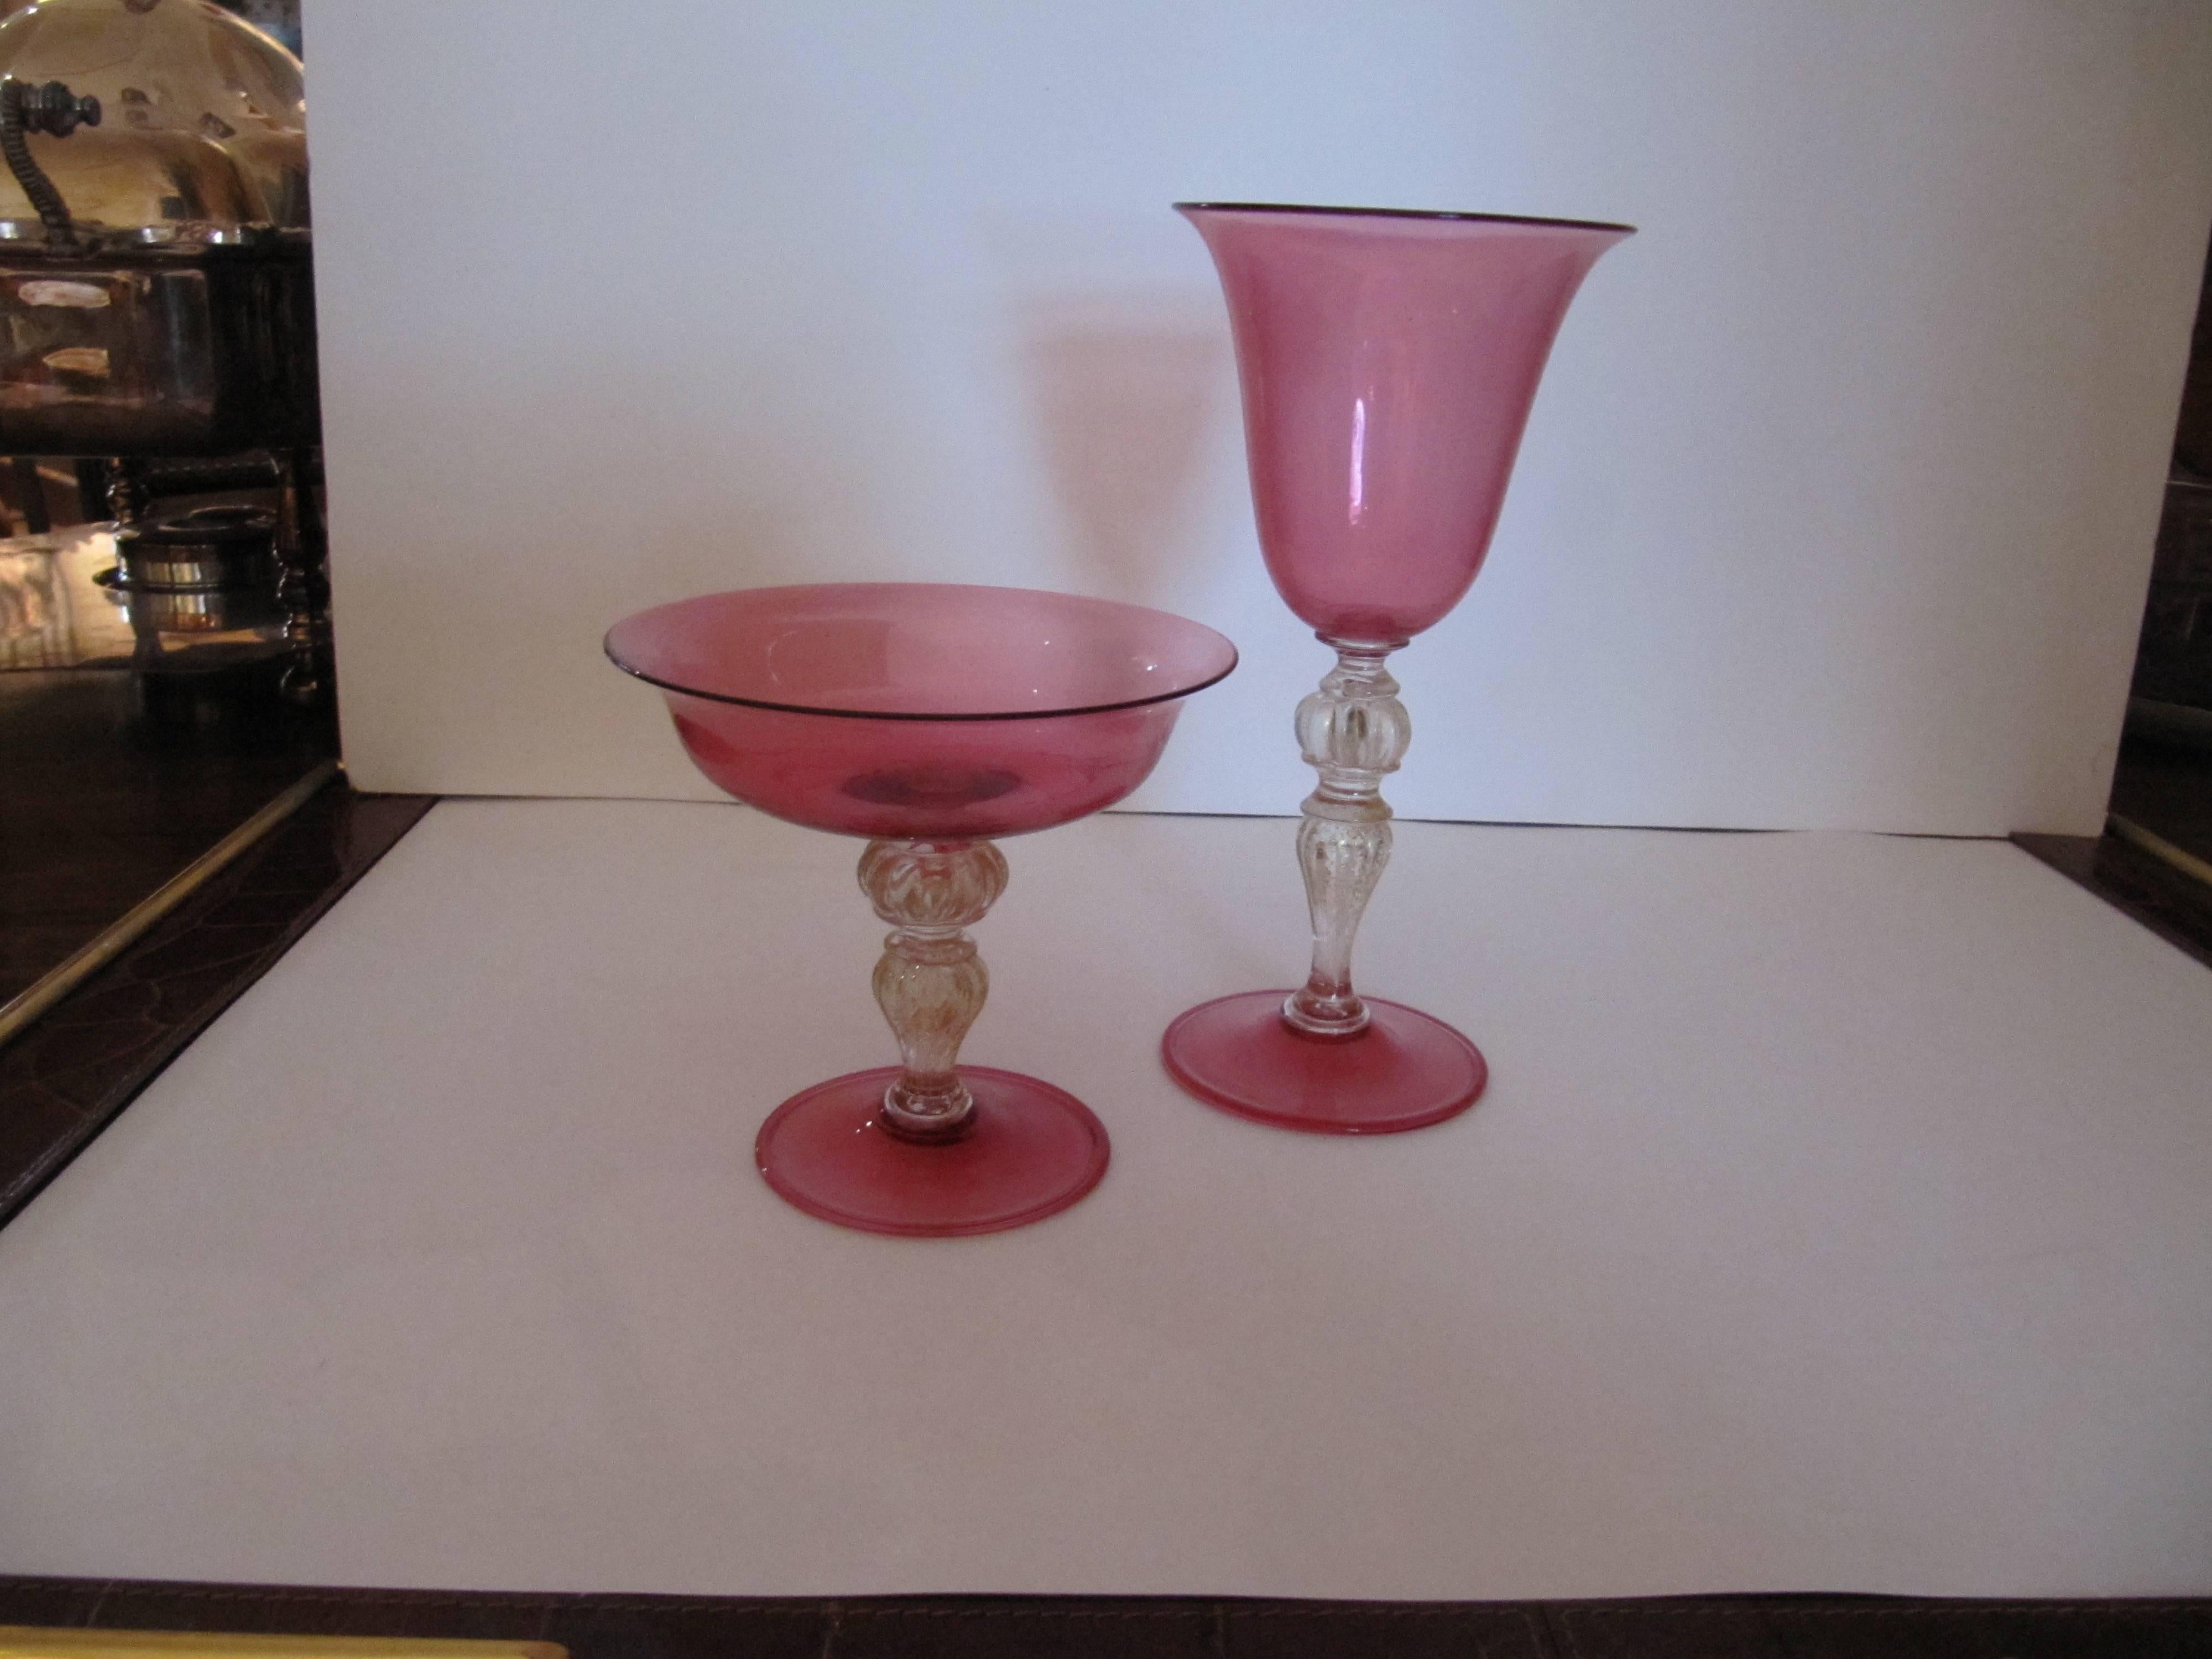 Extensive collection of cranberry handblown Venetian glass stemware, plates and tumblers. Consisting of 11 large wines or water goblets 4